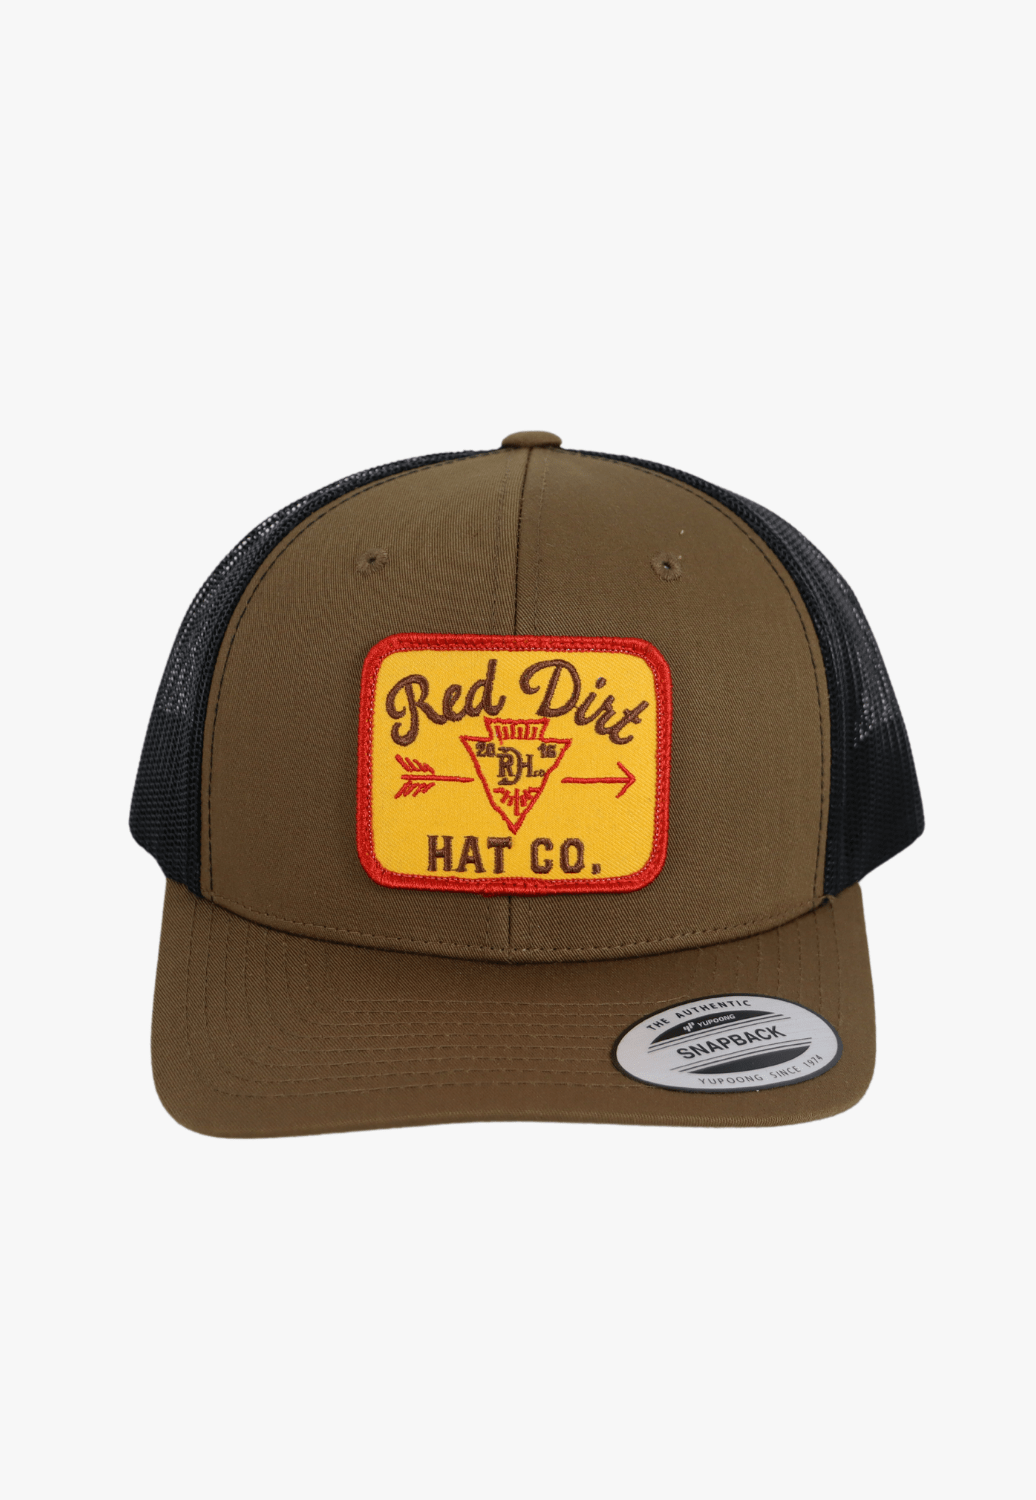 Red Dirt Hat Co. HATS - Caps Brown/Black Red Dirt Hat Co. Mineral Water Cap